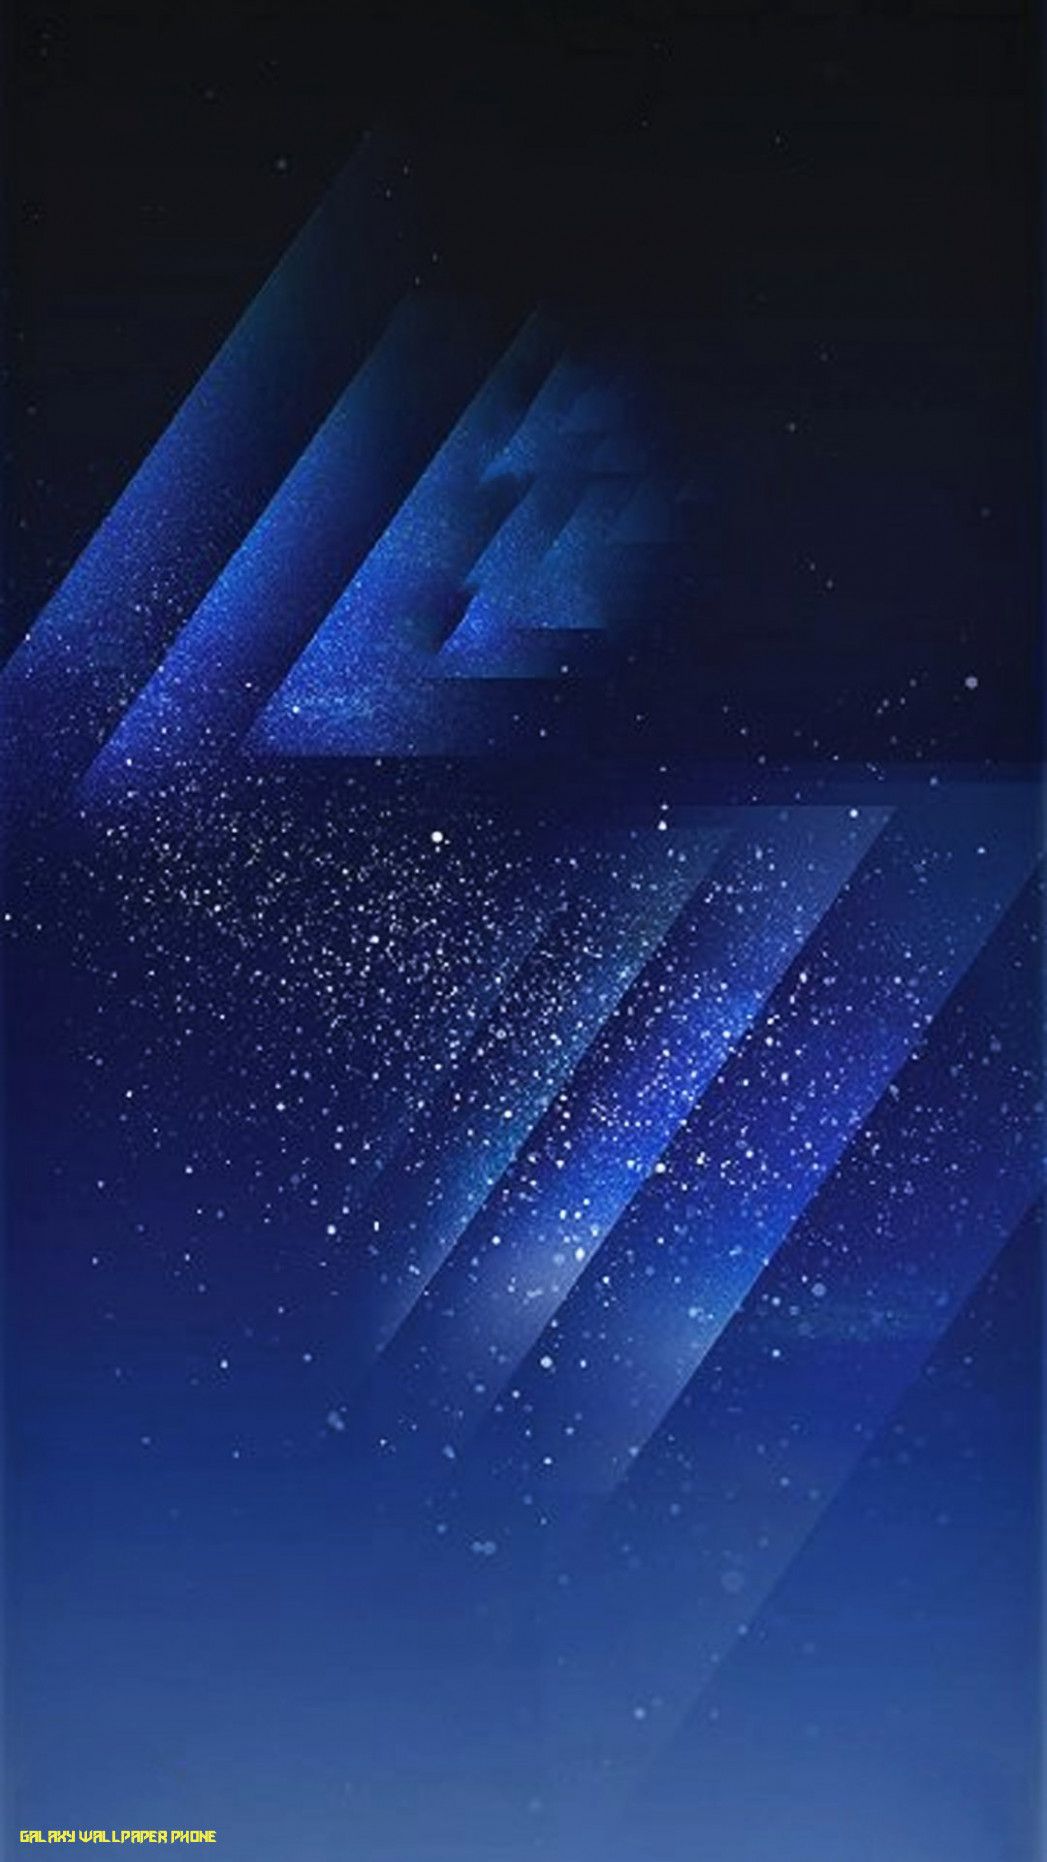 Customize your phone with wallpaper from the Samsung